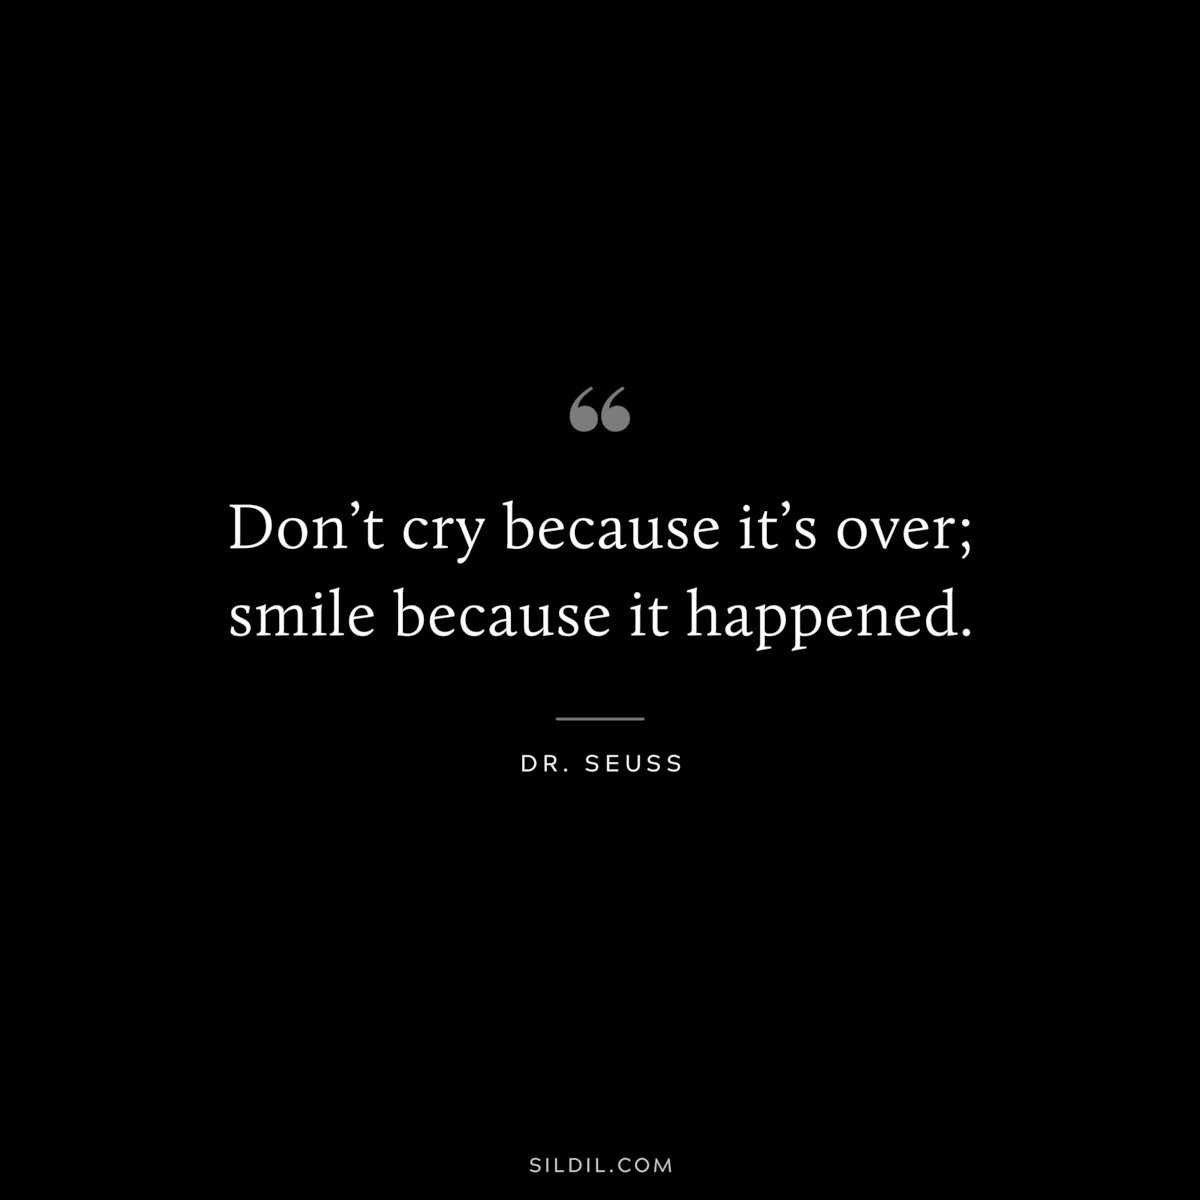 Don’t cry because it’s over; smile because it happened. ― Dr. Seuss